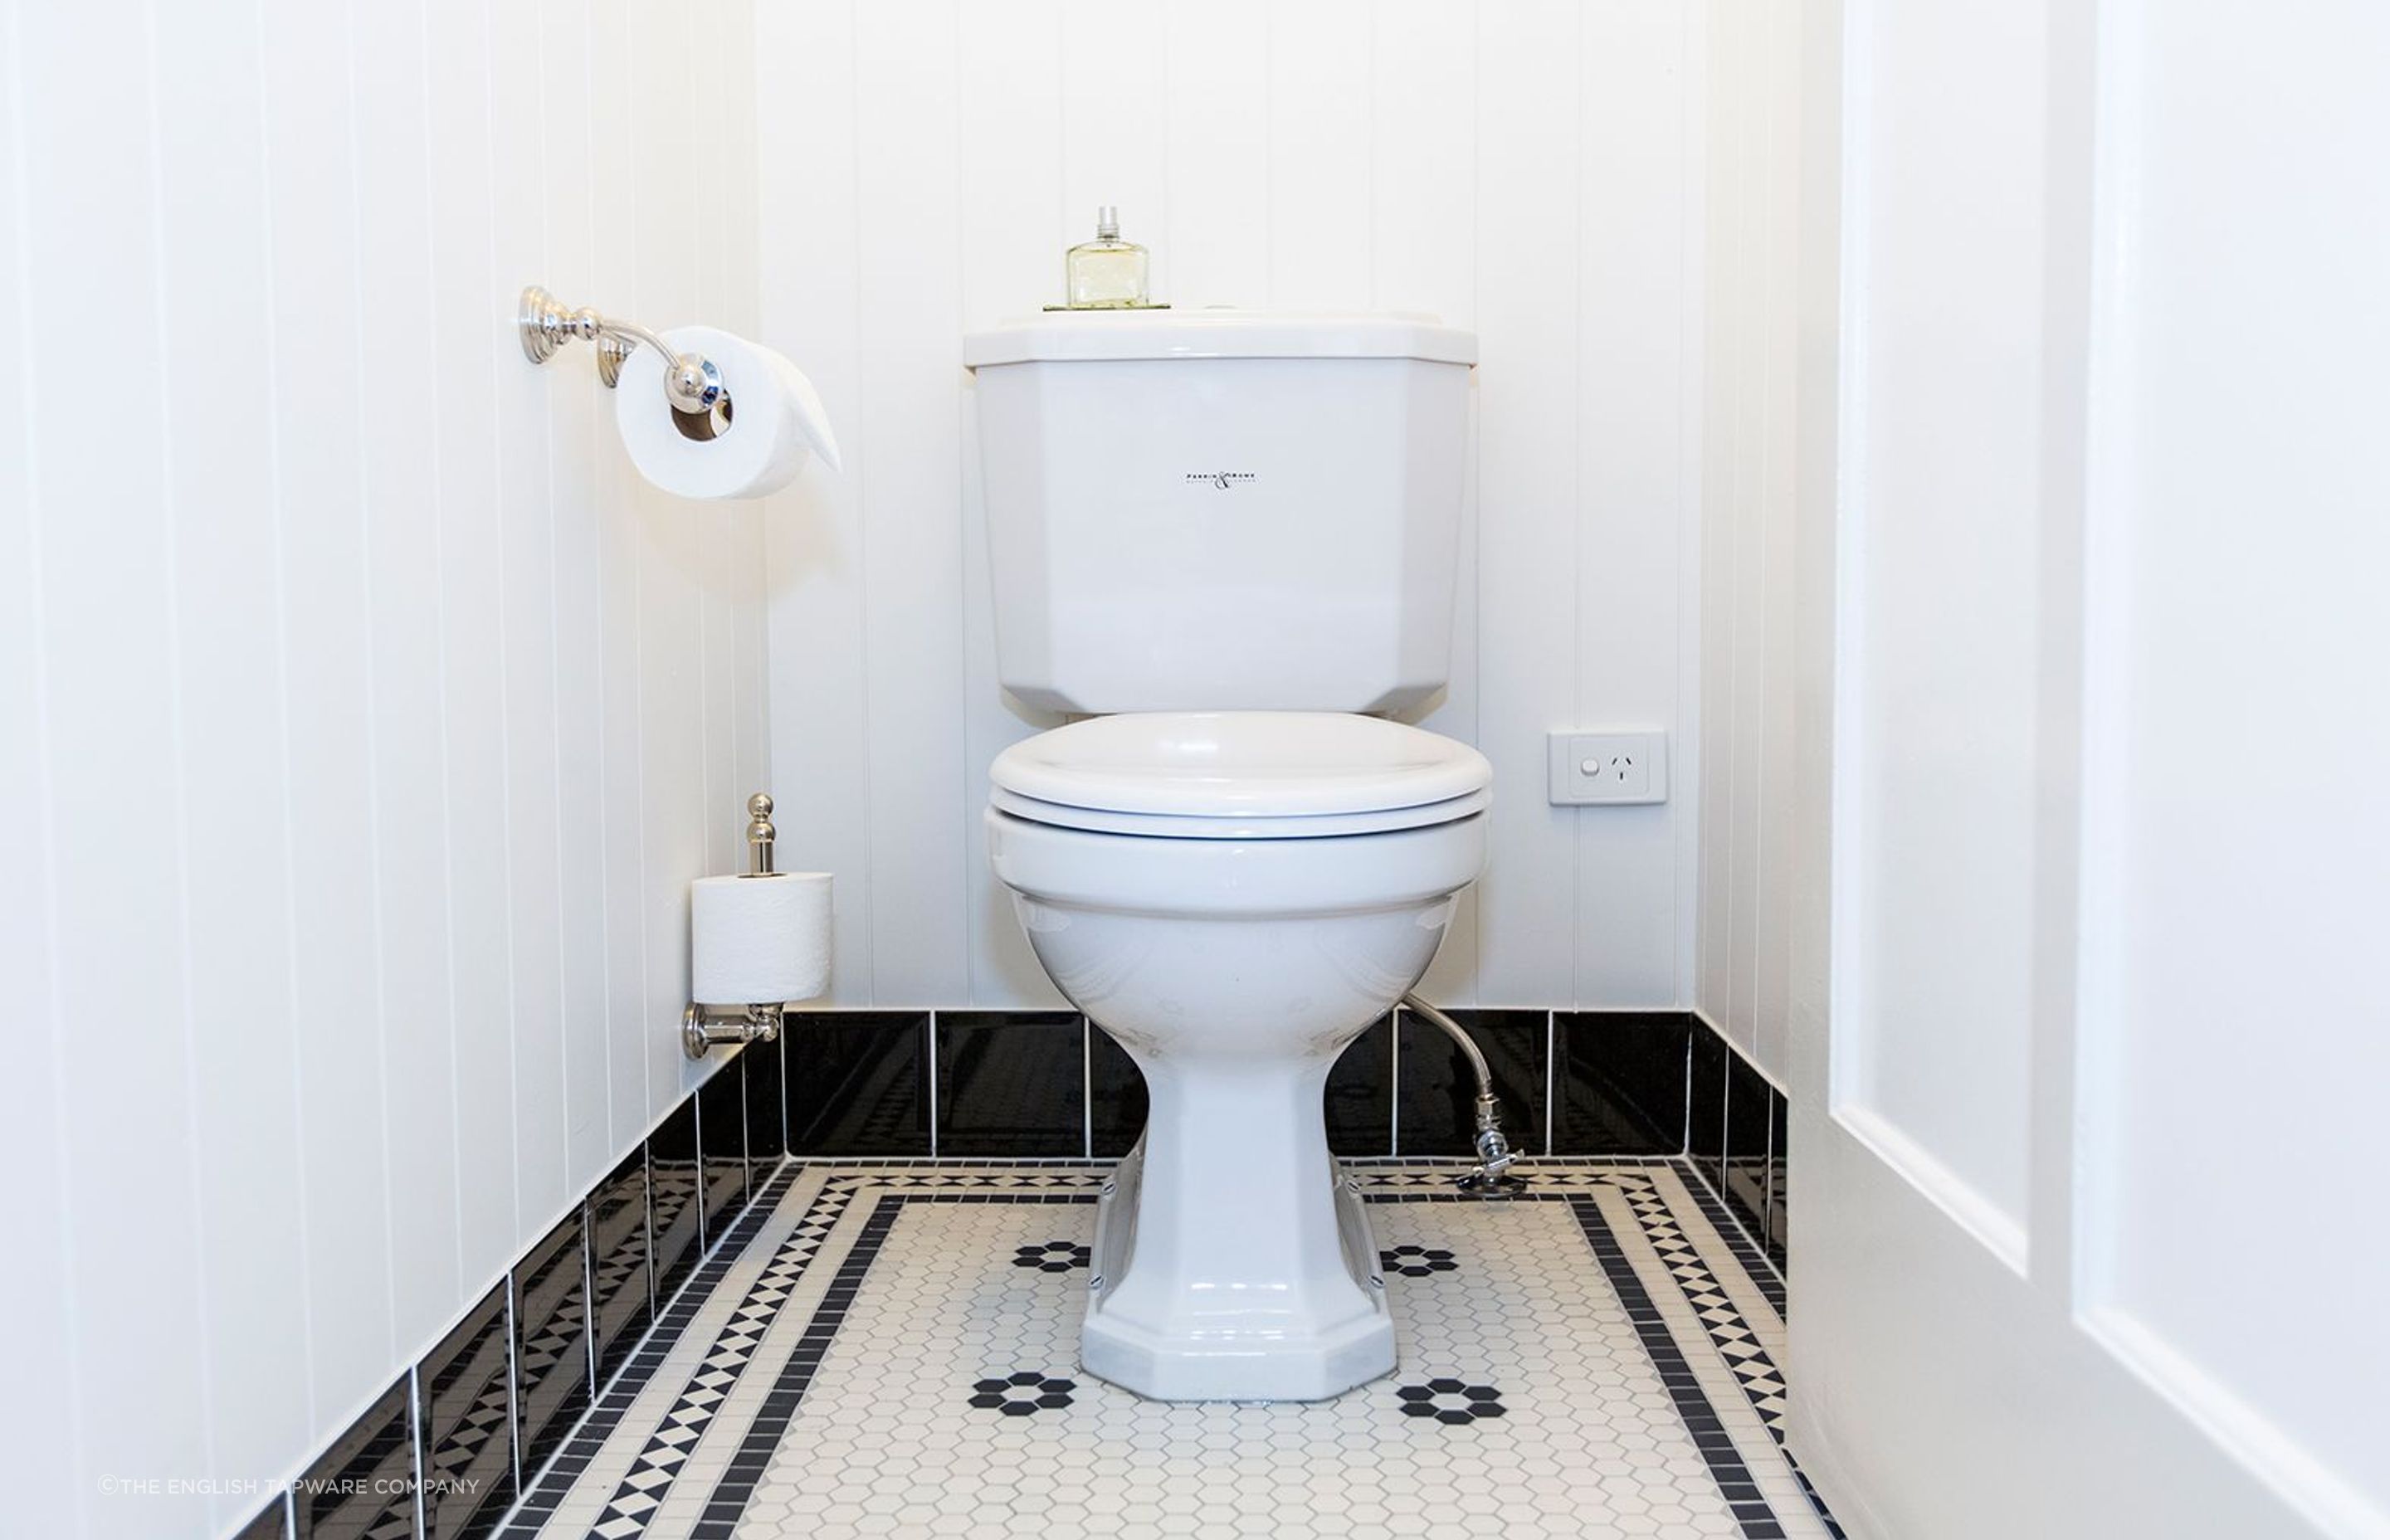 Design extras such as designer toilet roll holders can compliment a new toilet suite well.